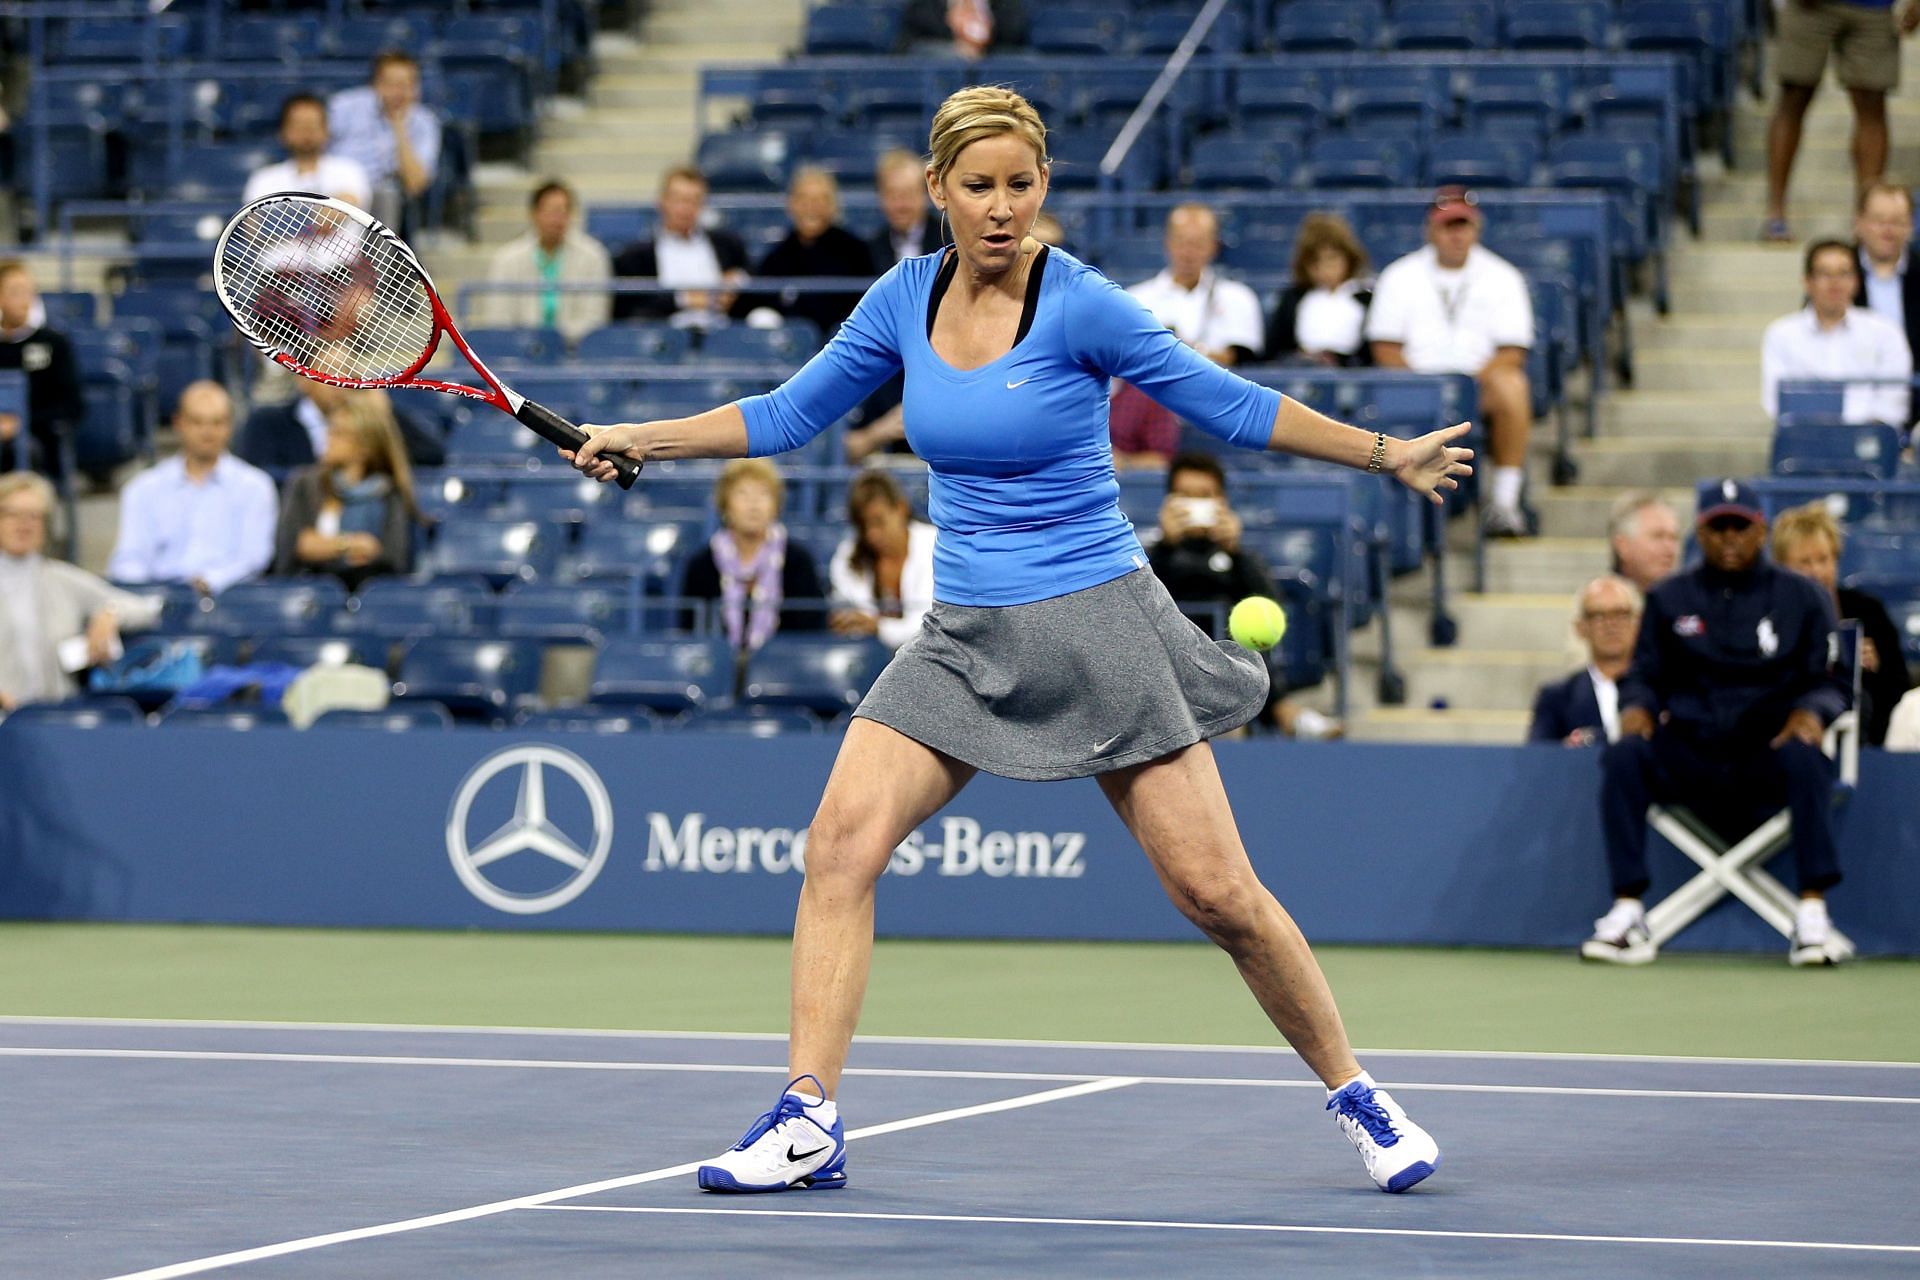 Chris Evert in action during the exhibition match at the 2013 US Open.